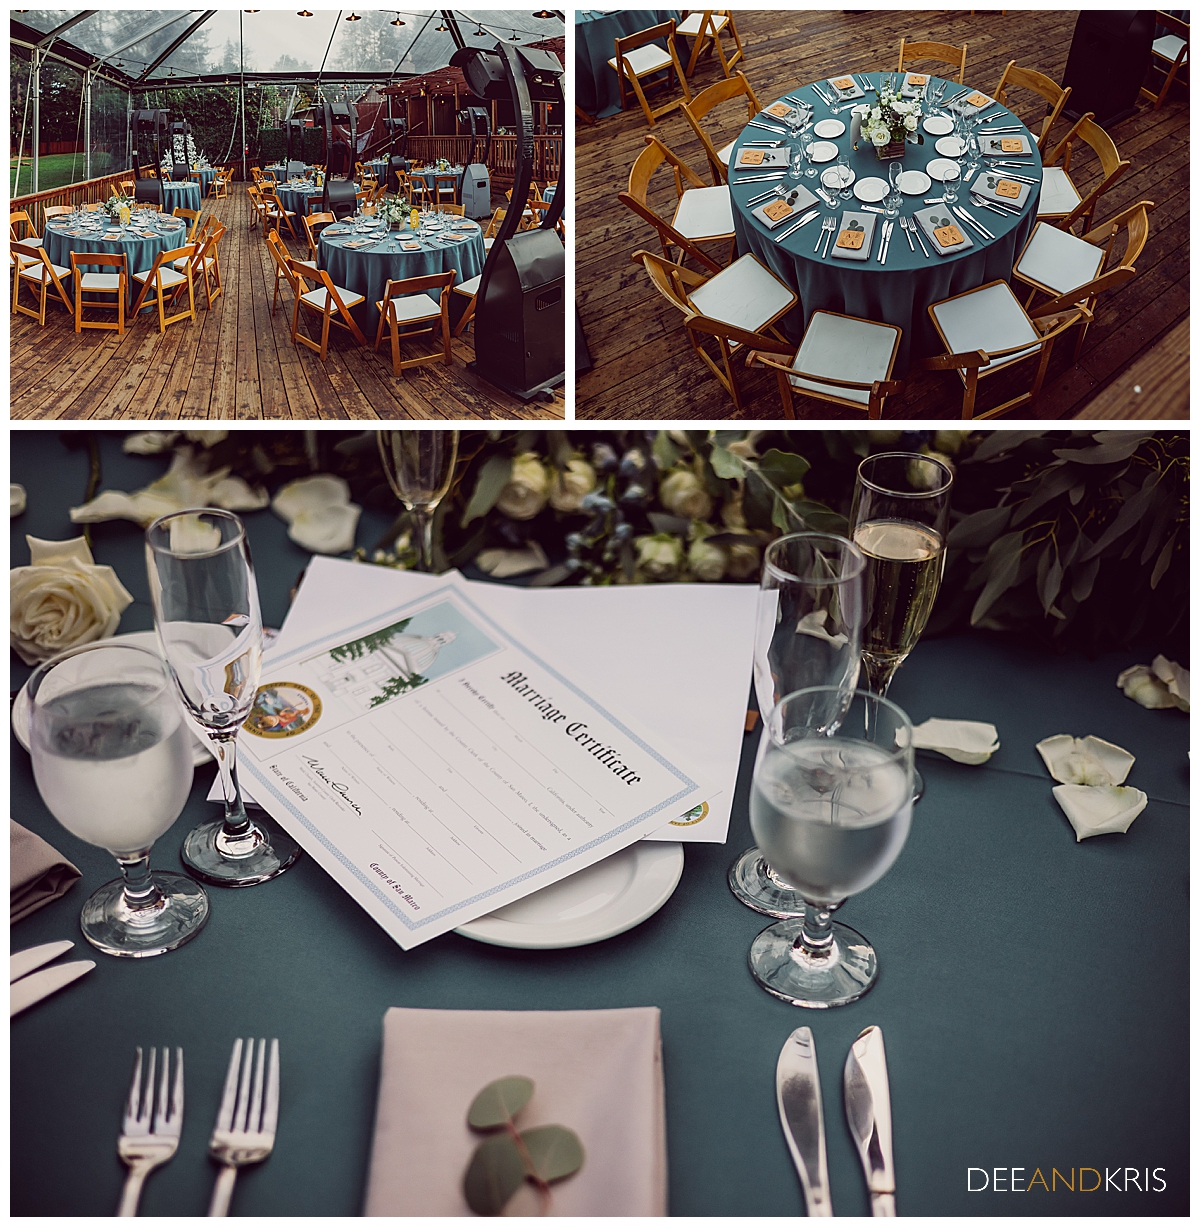 Three images of table settings.